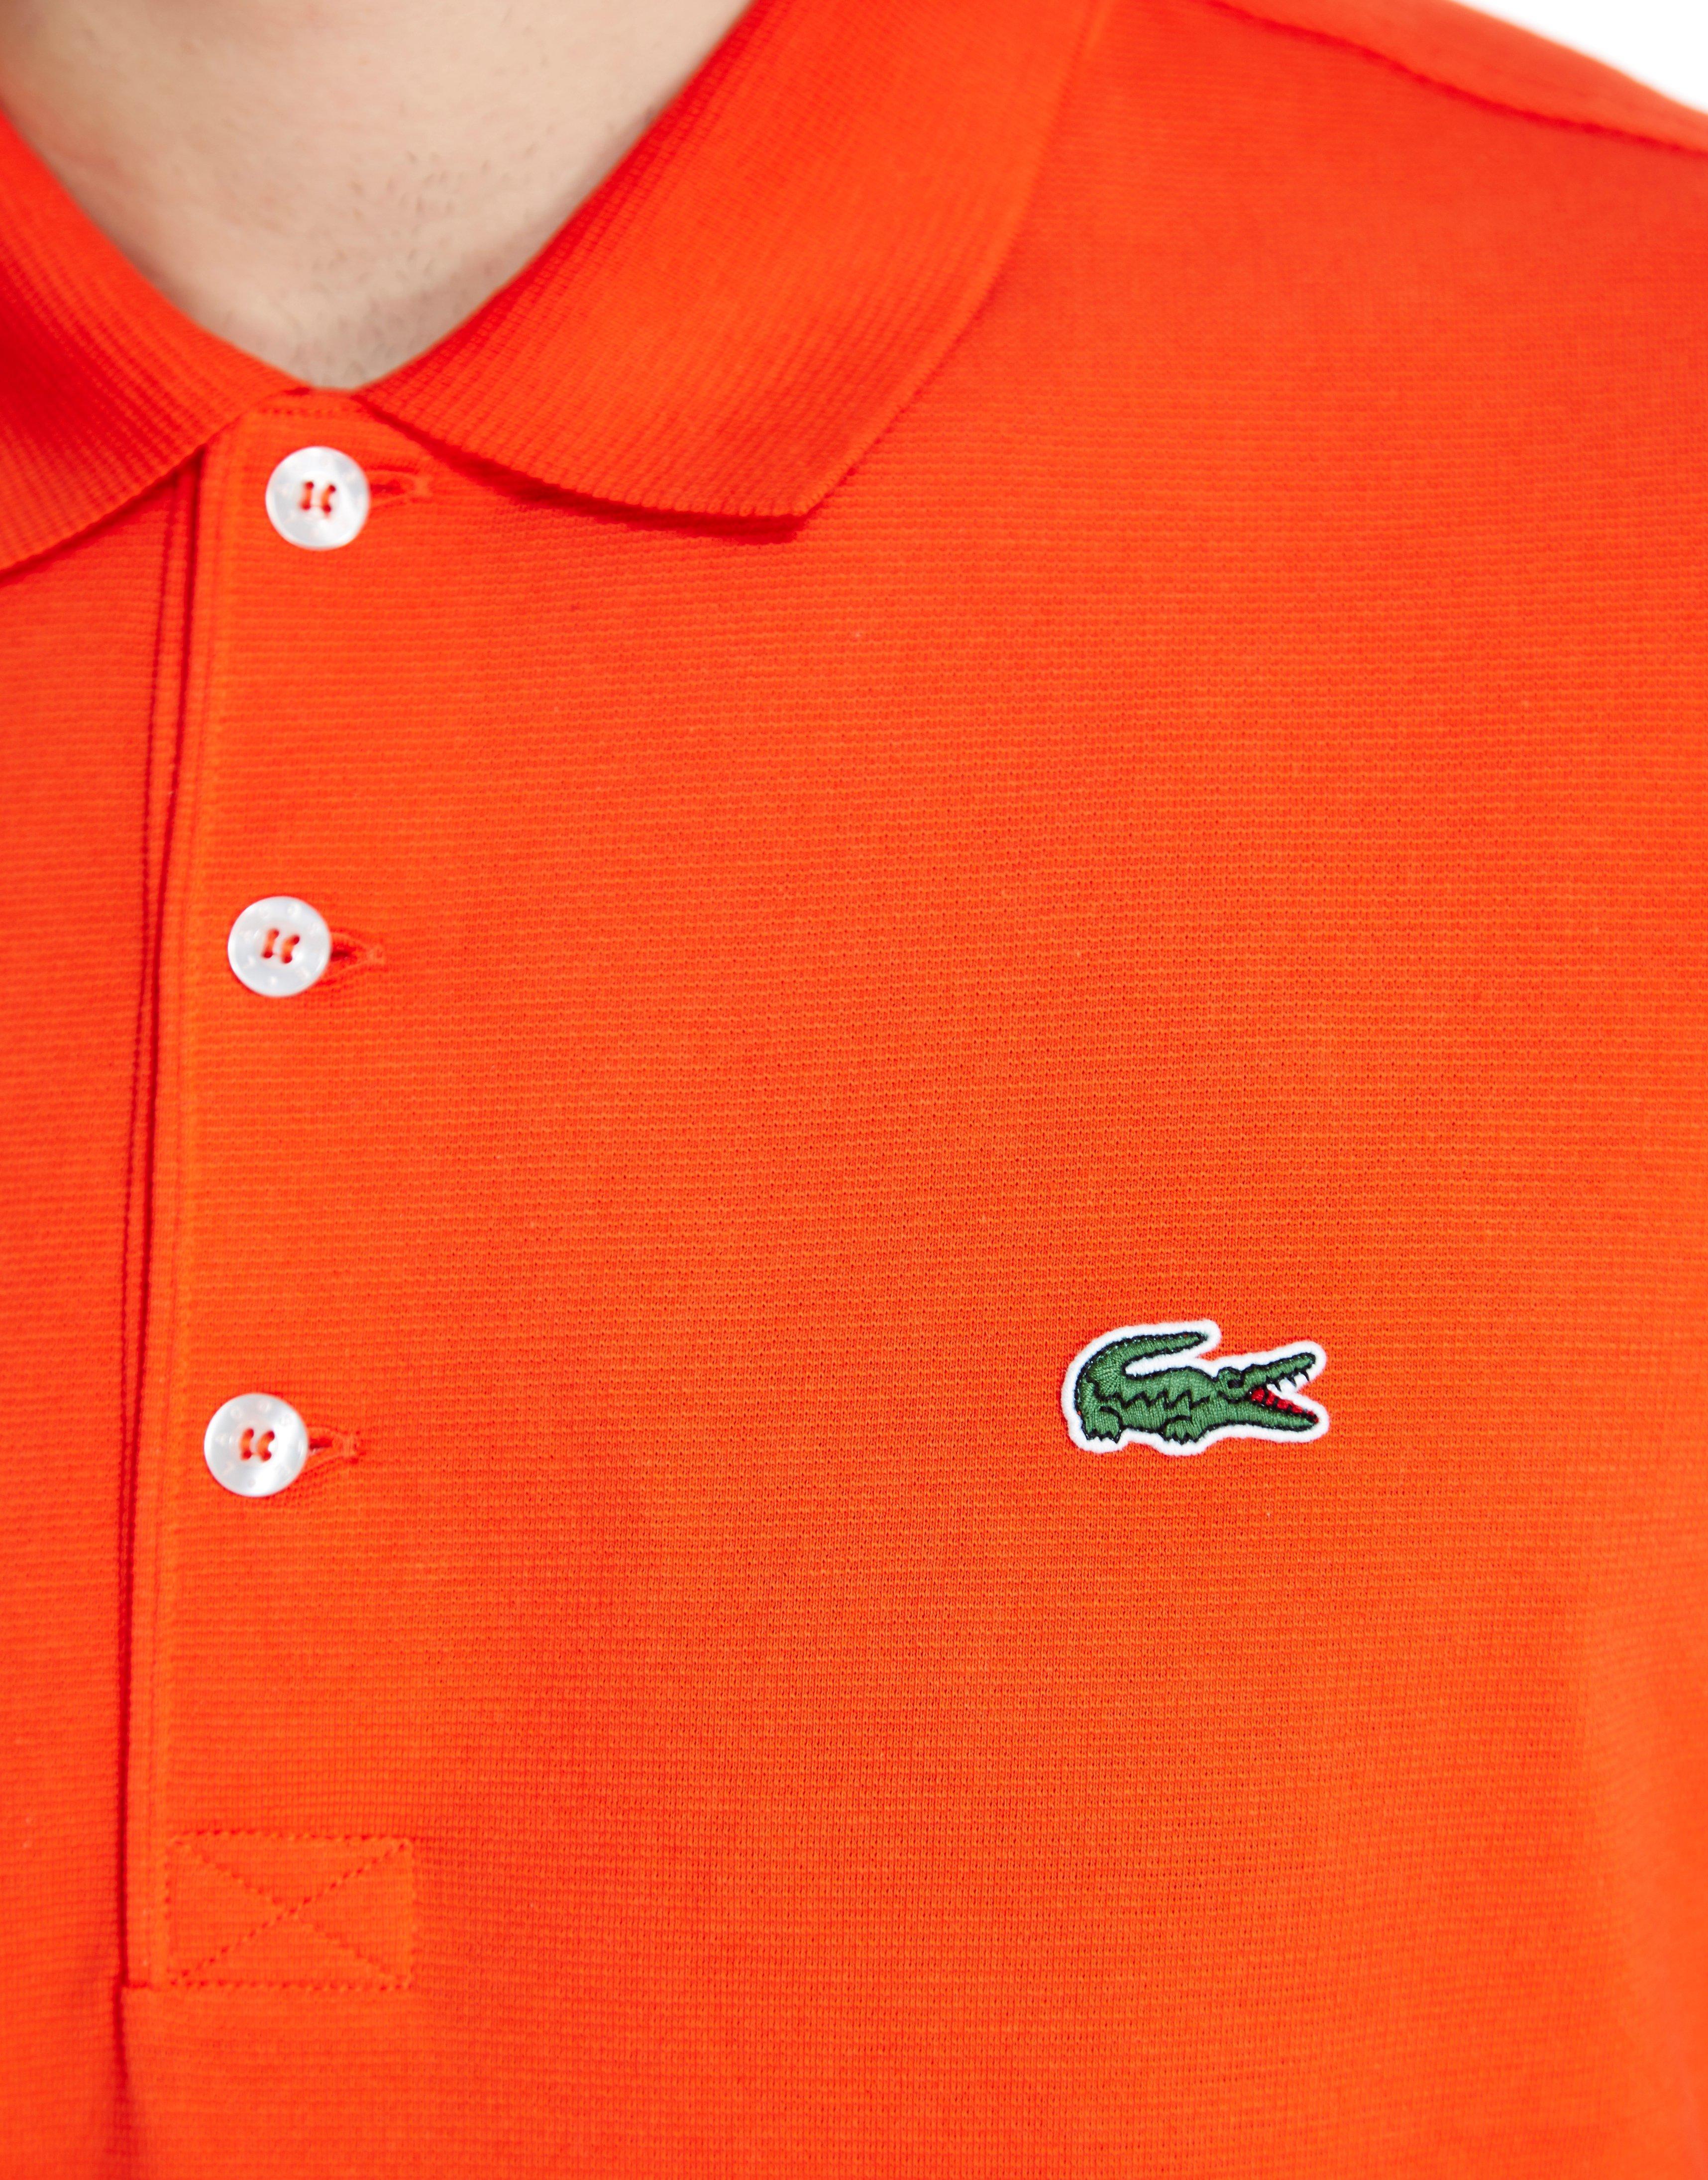 Alligator Polo Shirts with Logo - Lacoste Alligator Polo Shirt in Red for Men - Lyst